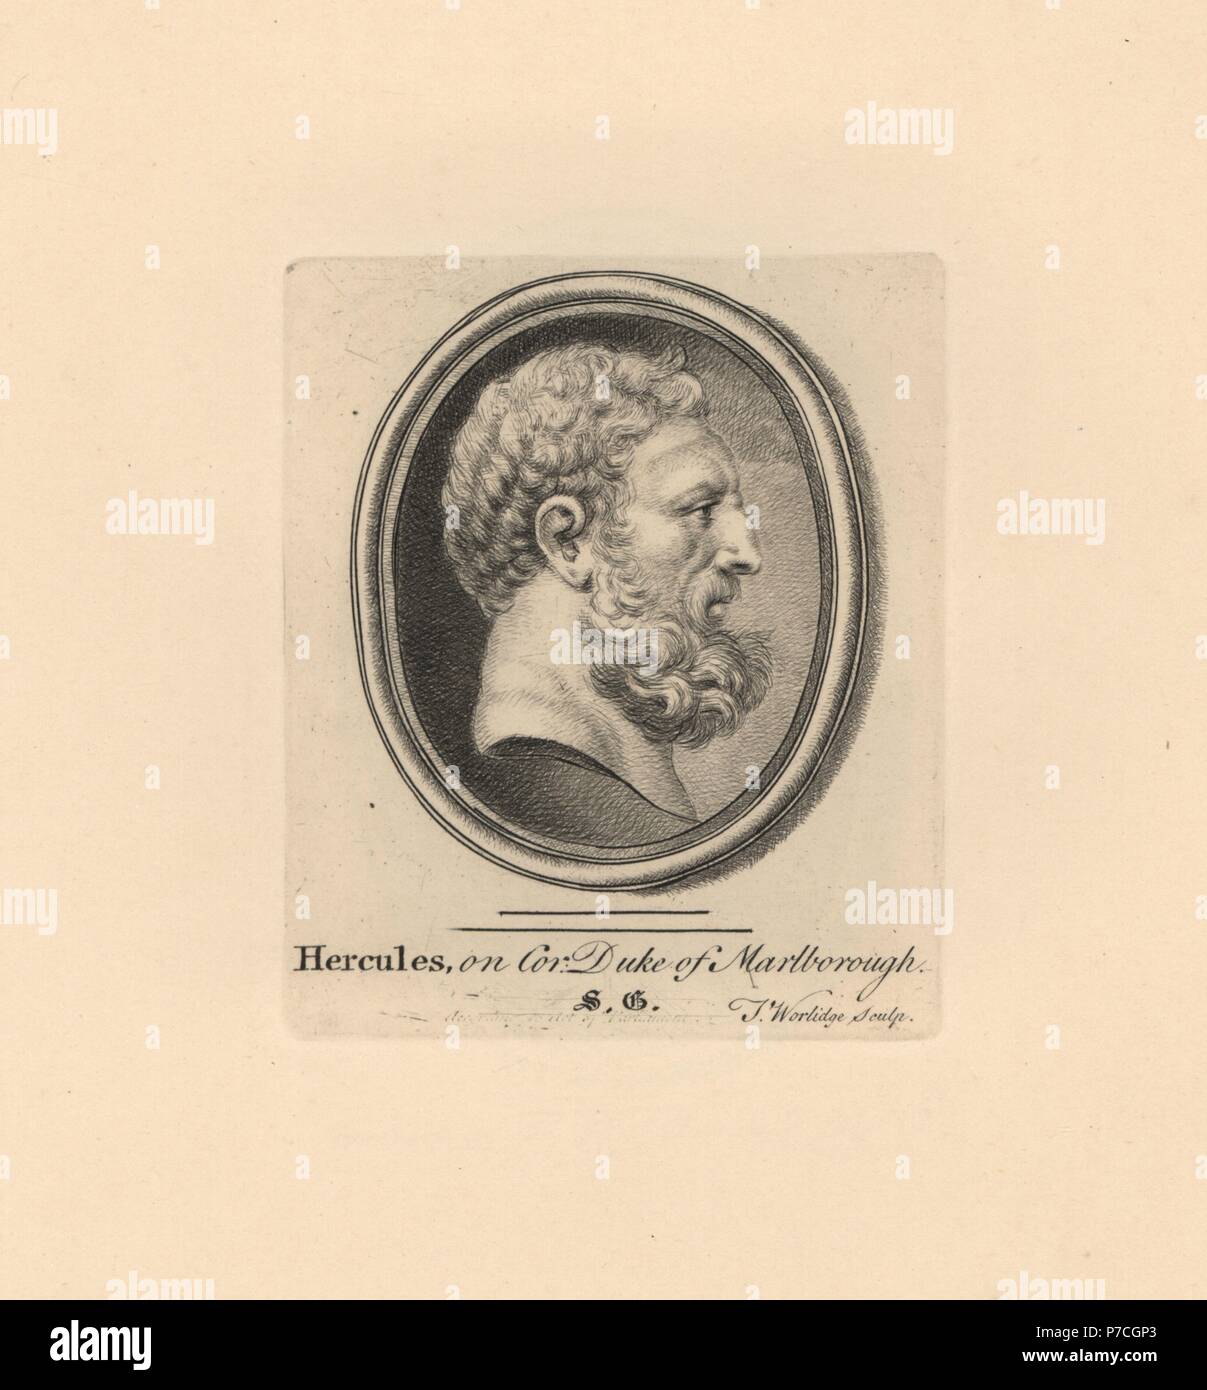 Portrait of Hercules, Greek mythical hero, on cornelian in the Duke of Marlborough's collection. Copperplate engraving by Thomas Worlidge from James Vallentin's One Hundred and Eight Engravings from Antique Gems, 1863. Stock Photo